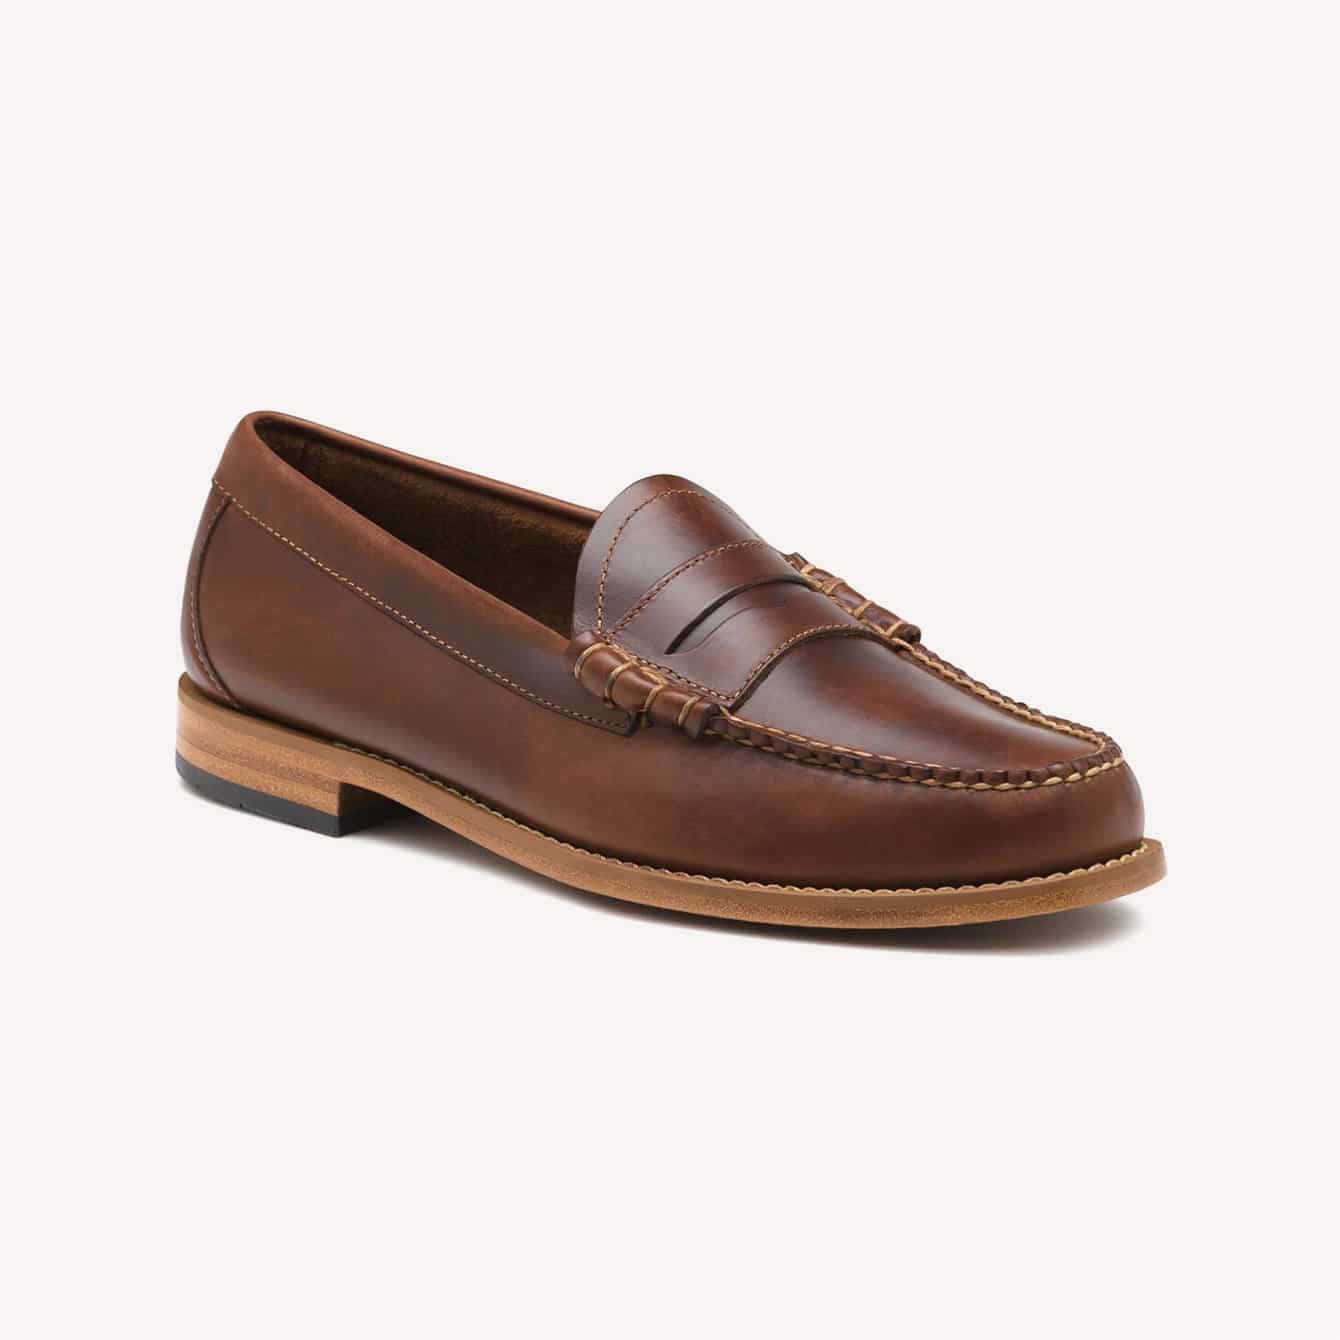 Loafers For Men Style 2022